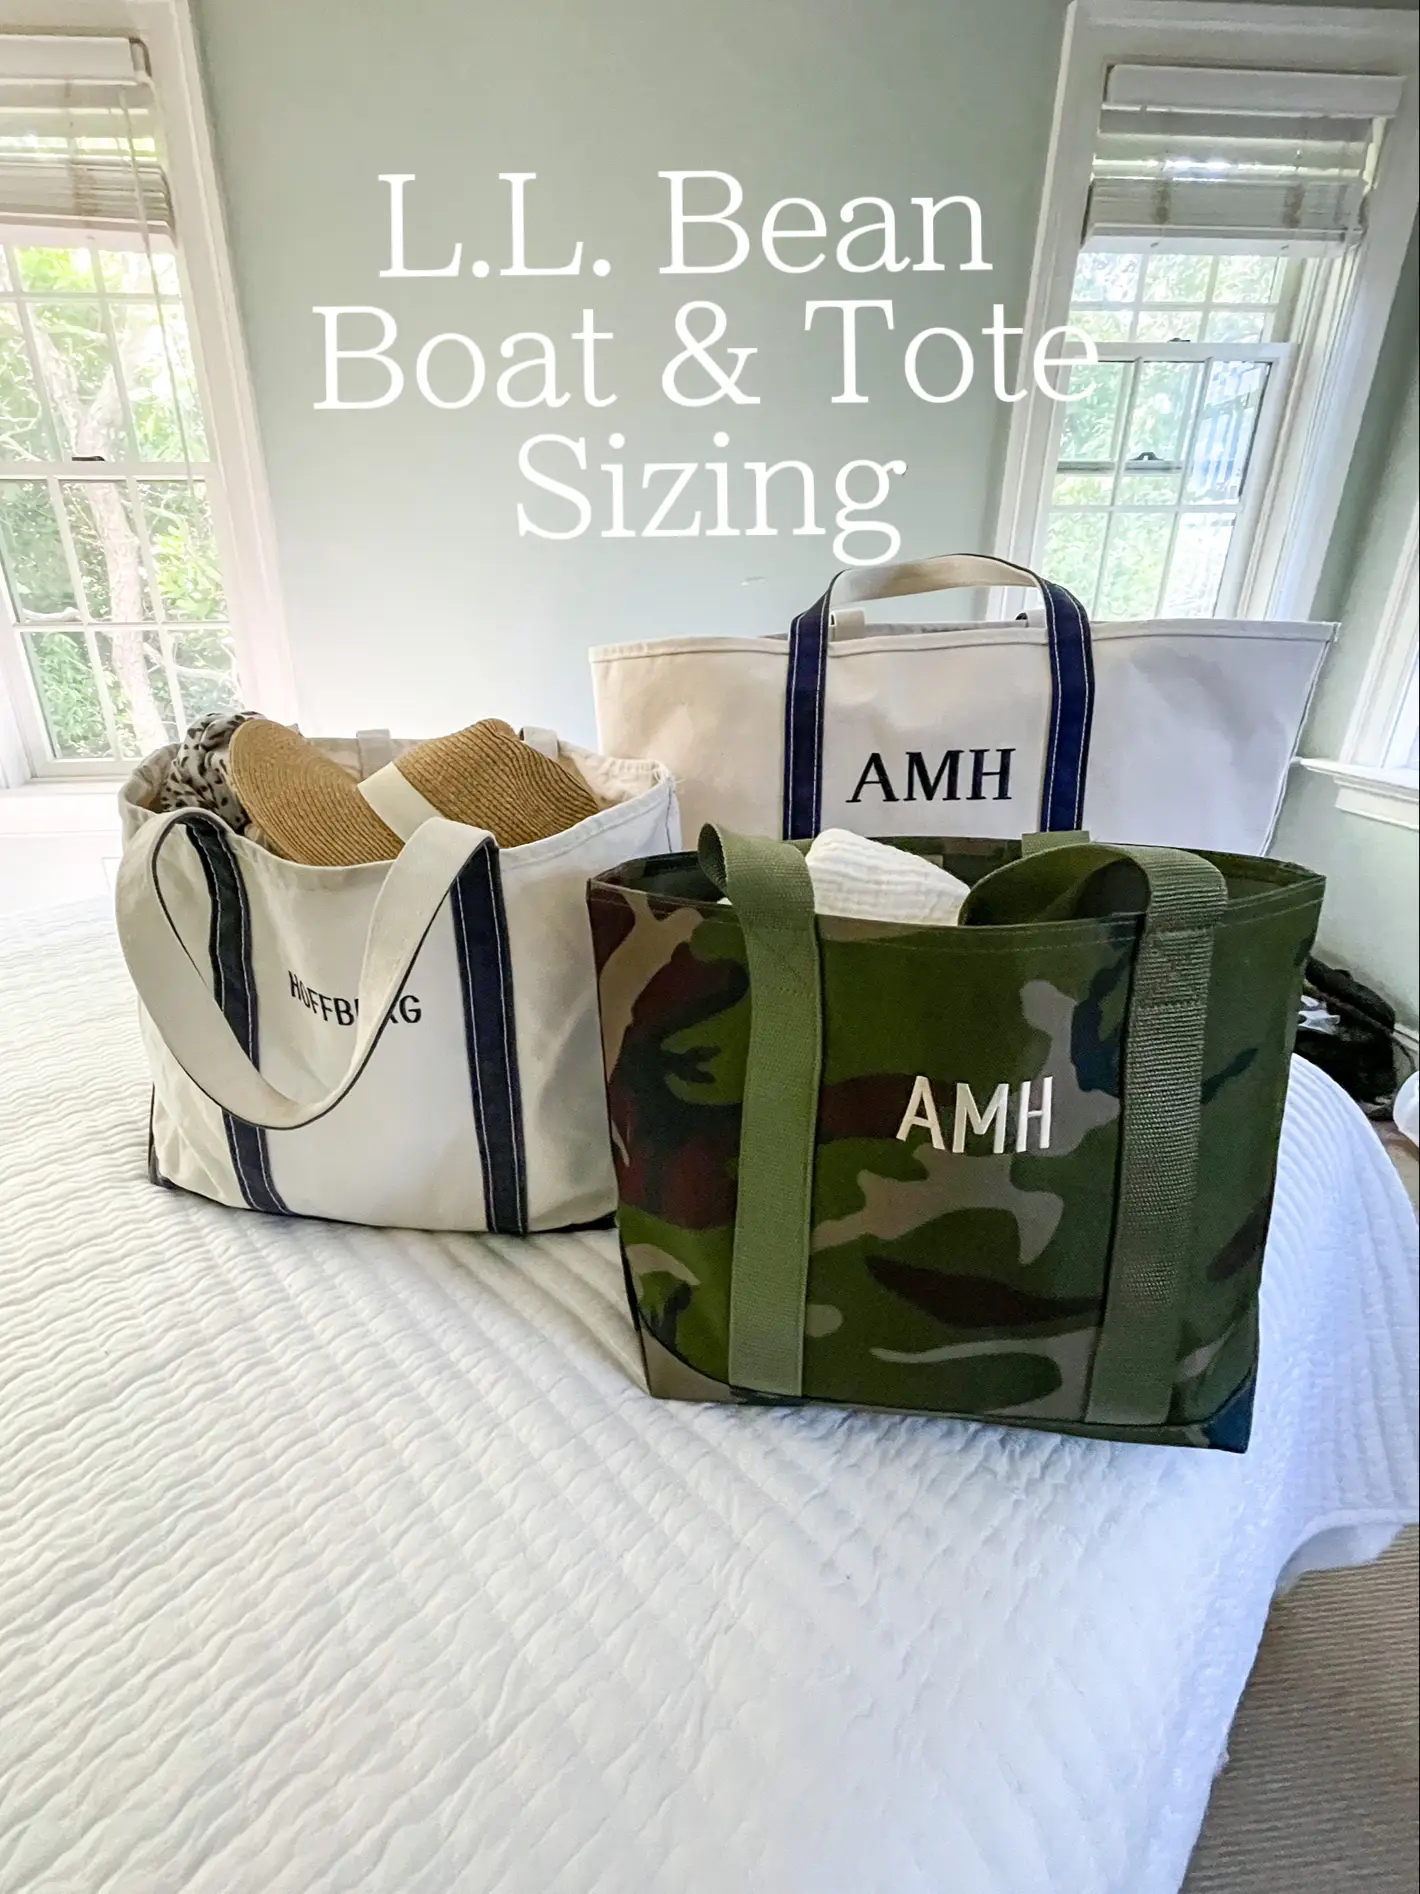 L.L. Bean Boat & Tote Sizing  Gallery posted by Allie Hoffberg